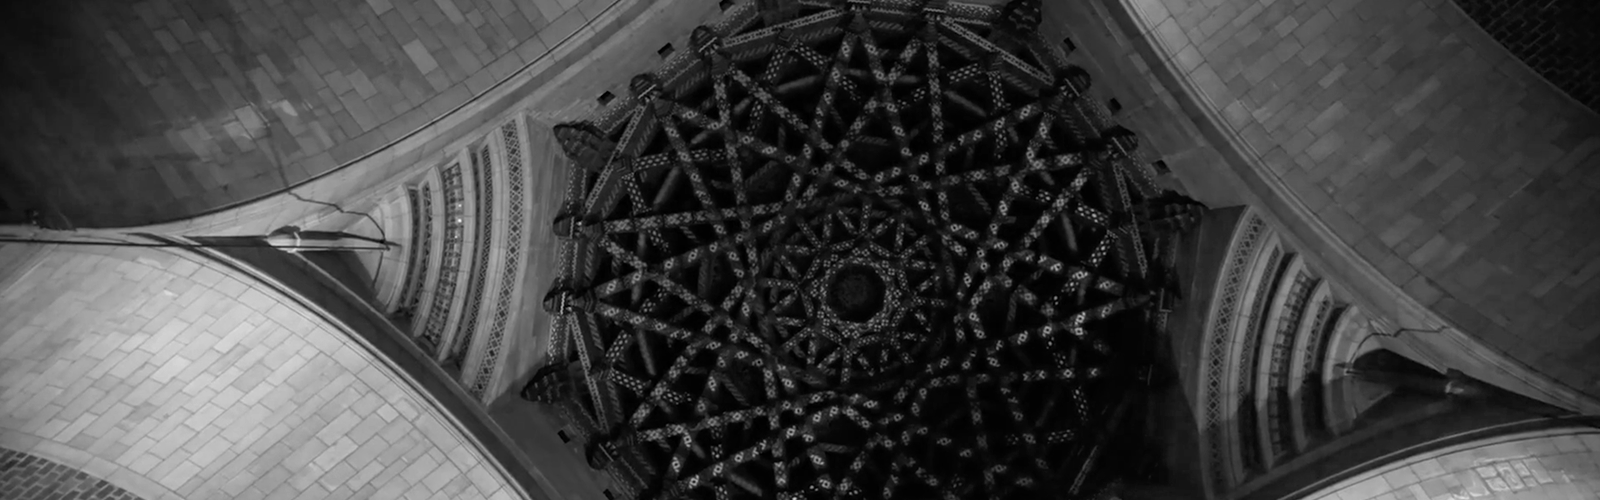 st-barts-ceiling-1